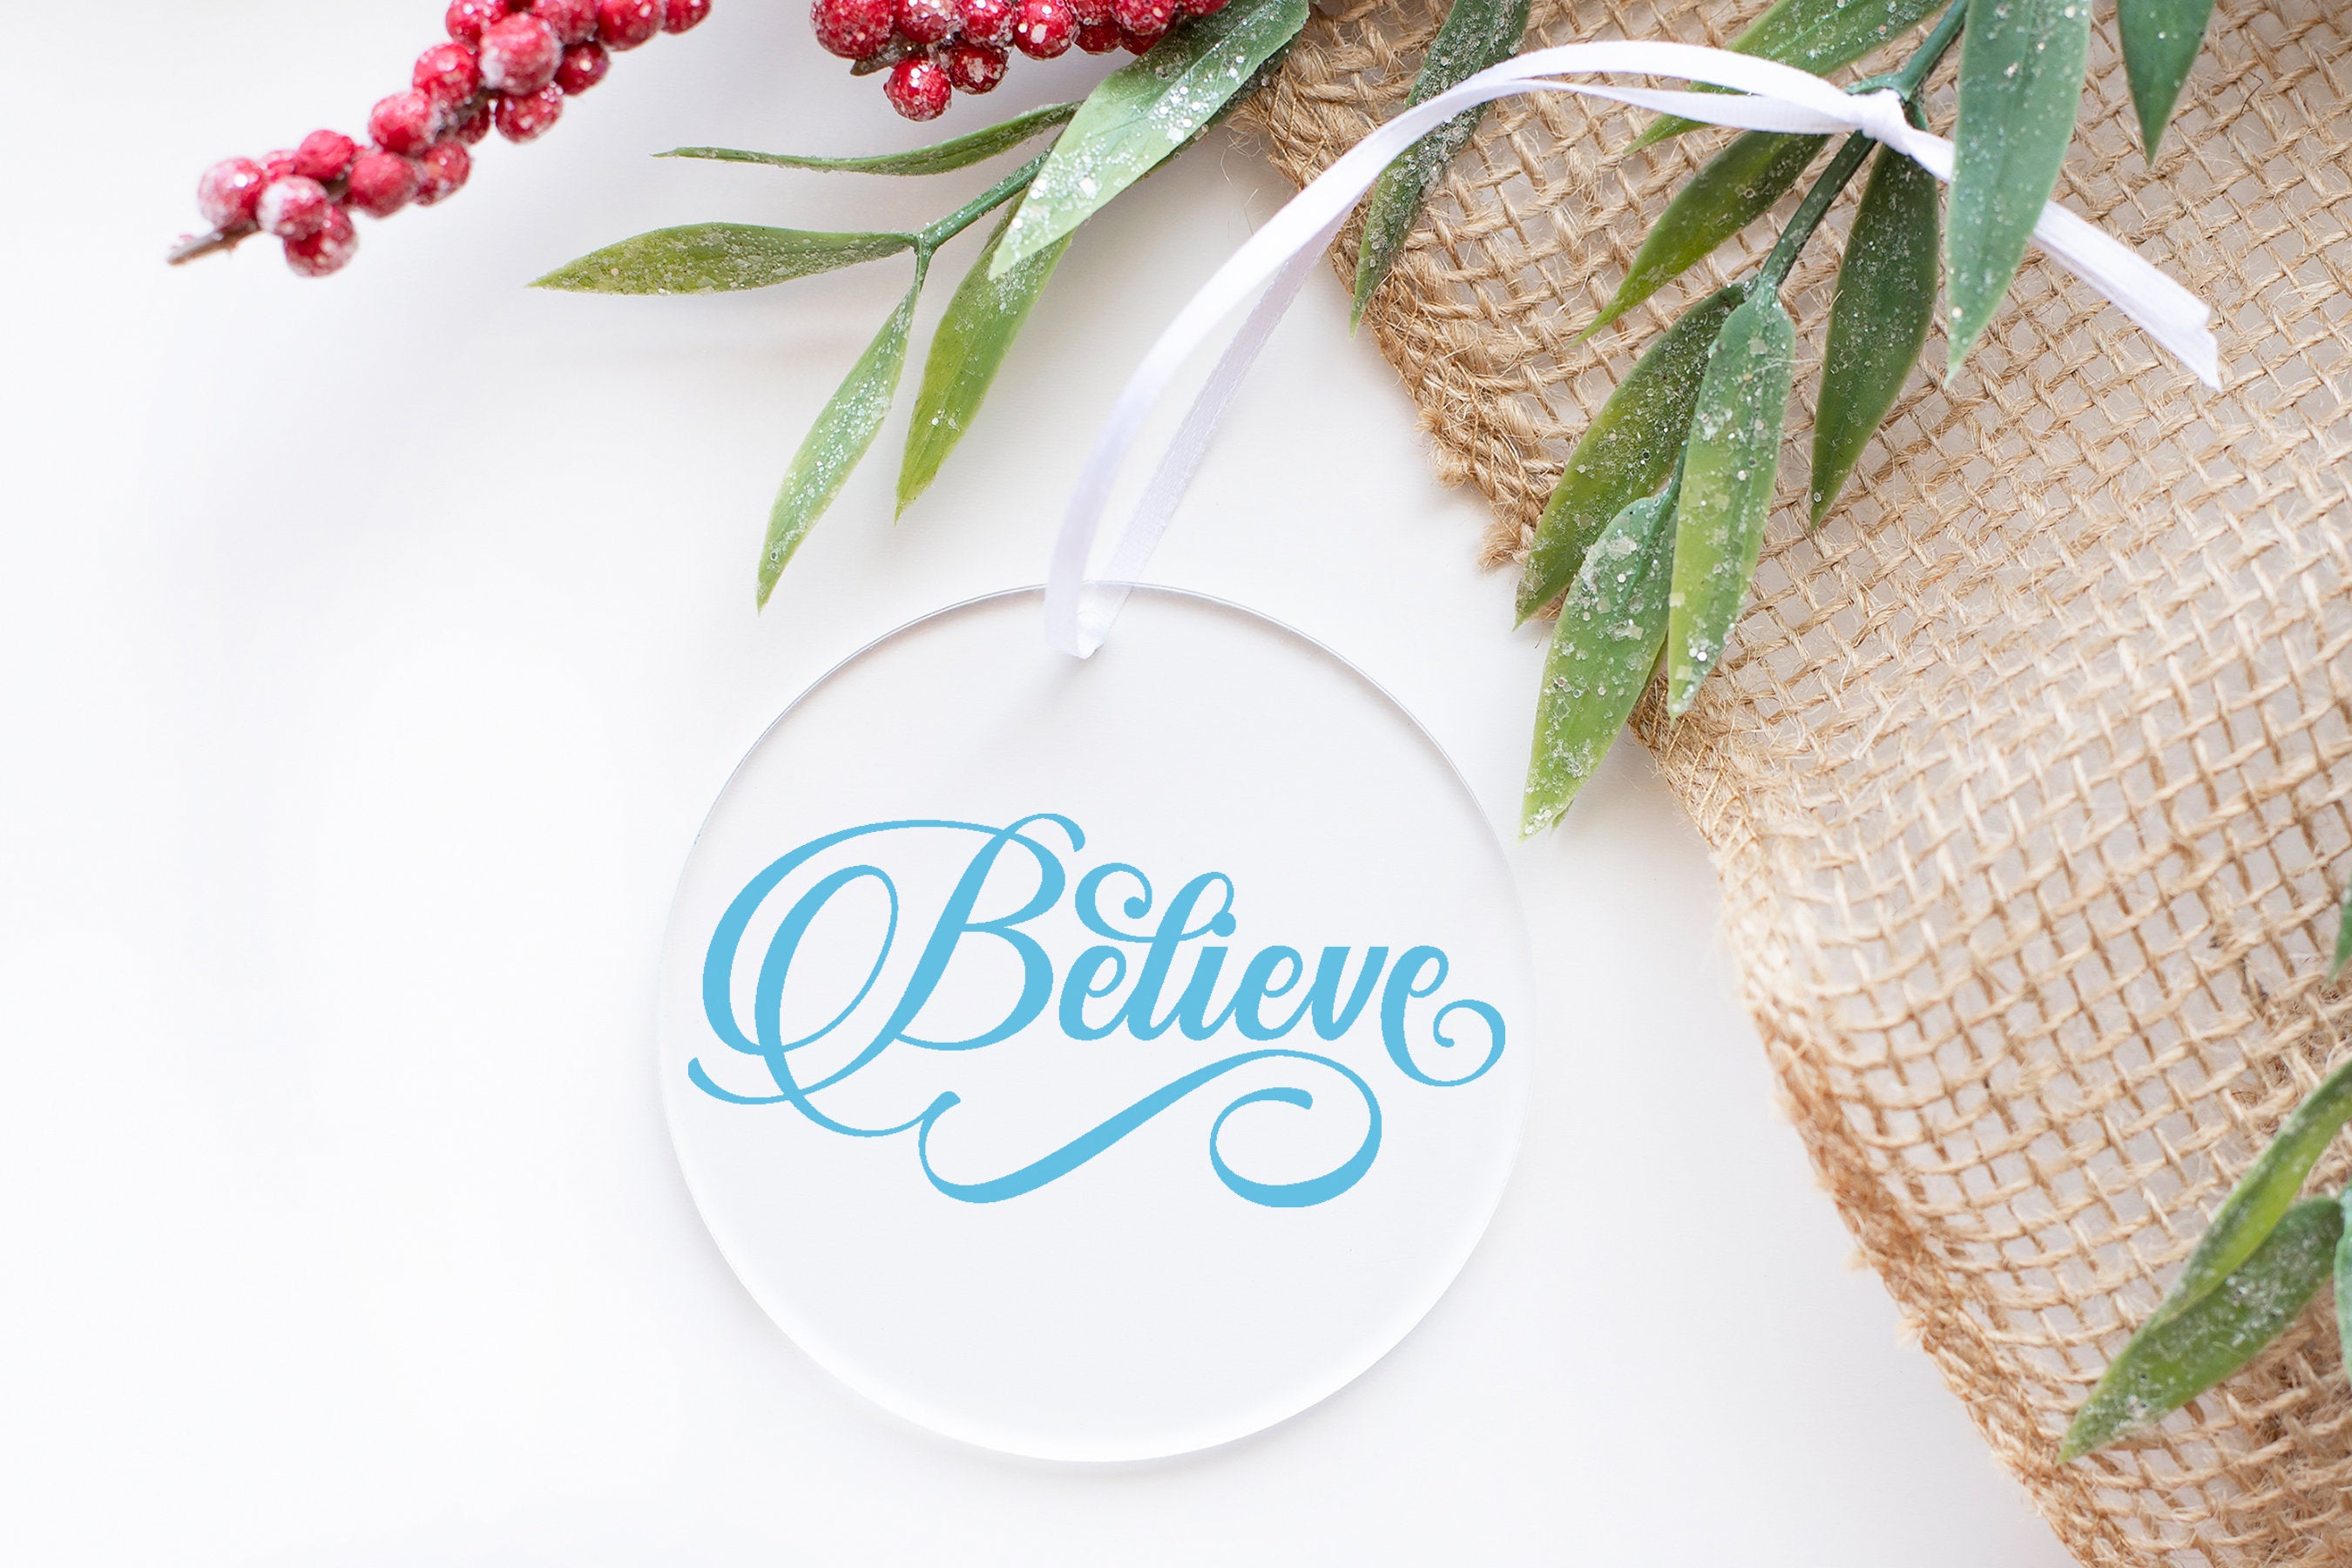 Believe Ornament - Clear Round Acrylic Flat Disc Hanging Ornament for Home Decor, Holiday Gift, Not Glass